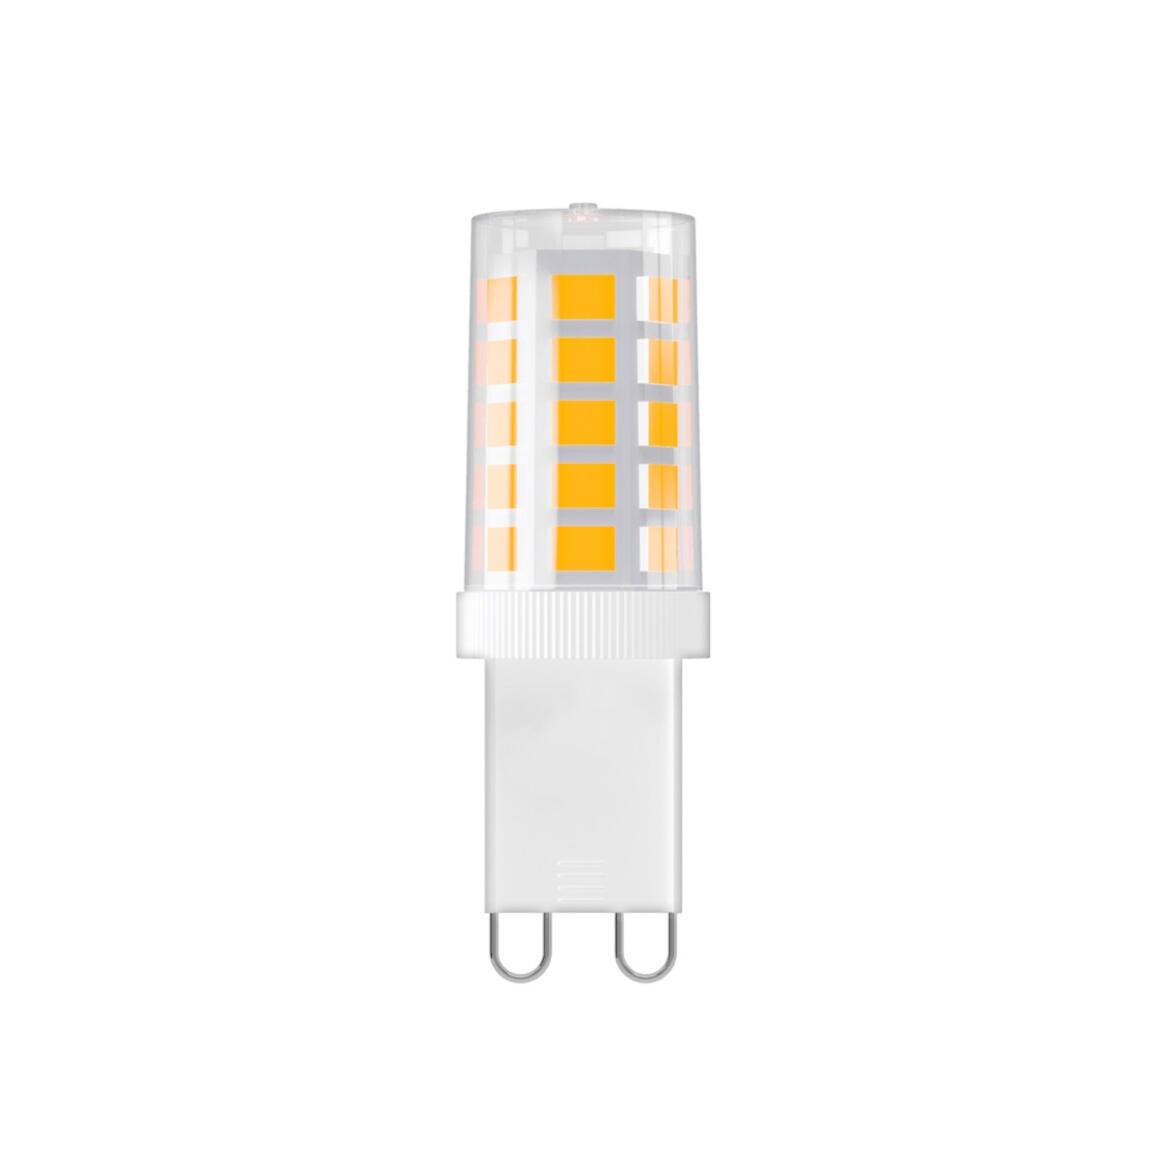 G9 LED Burner Lamp Bulb Dimmable 3W 3000k 320lm 4.9cm main product image